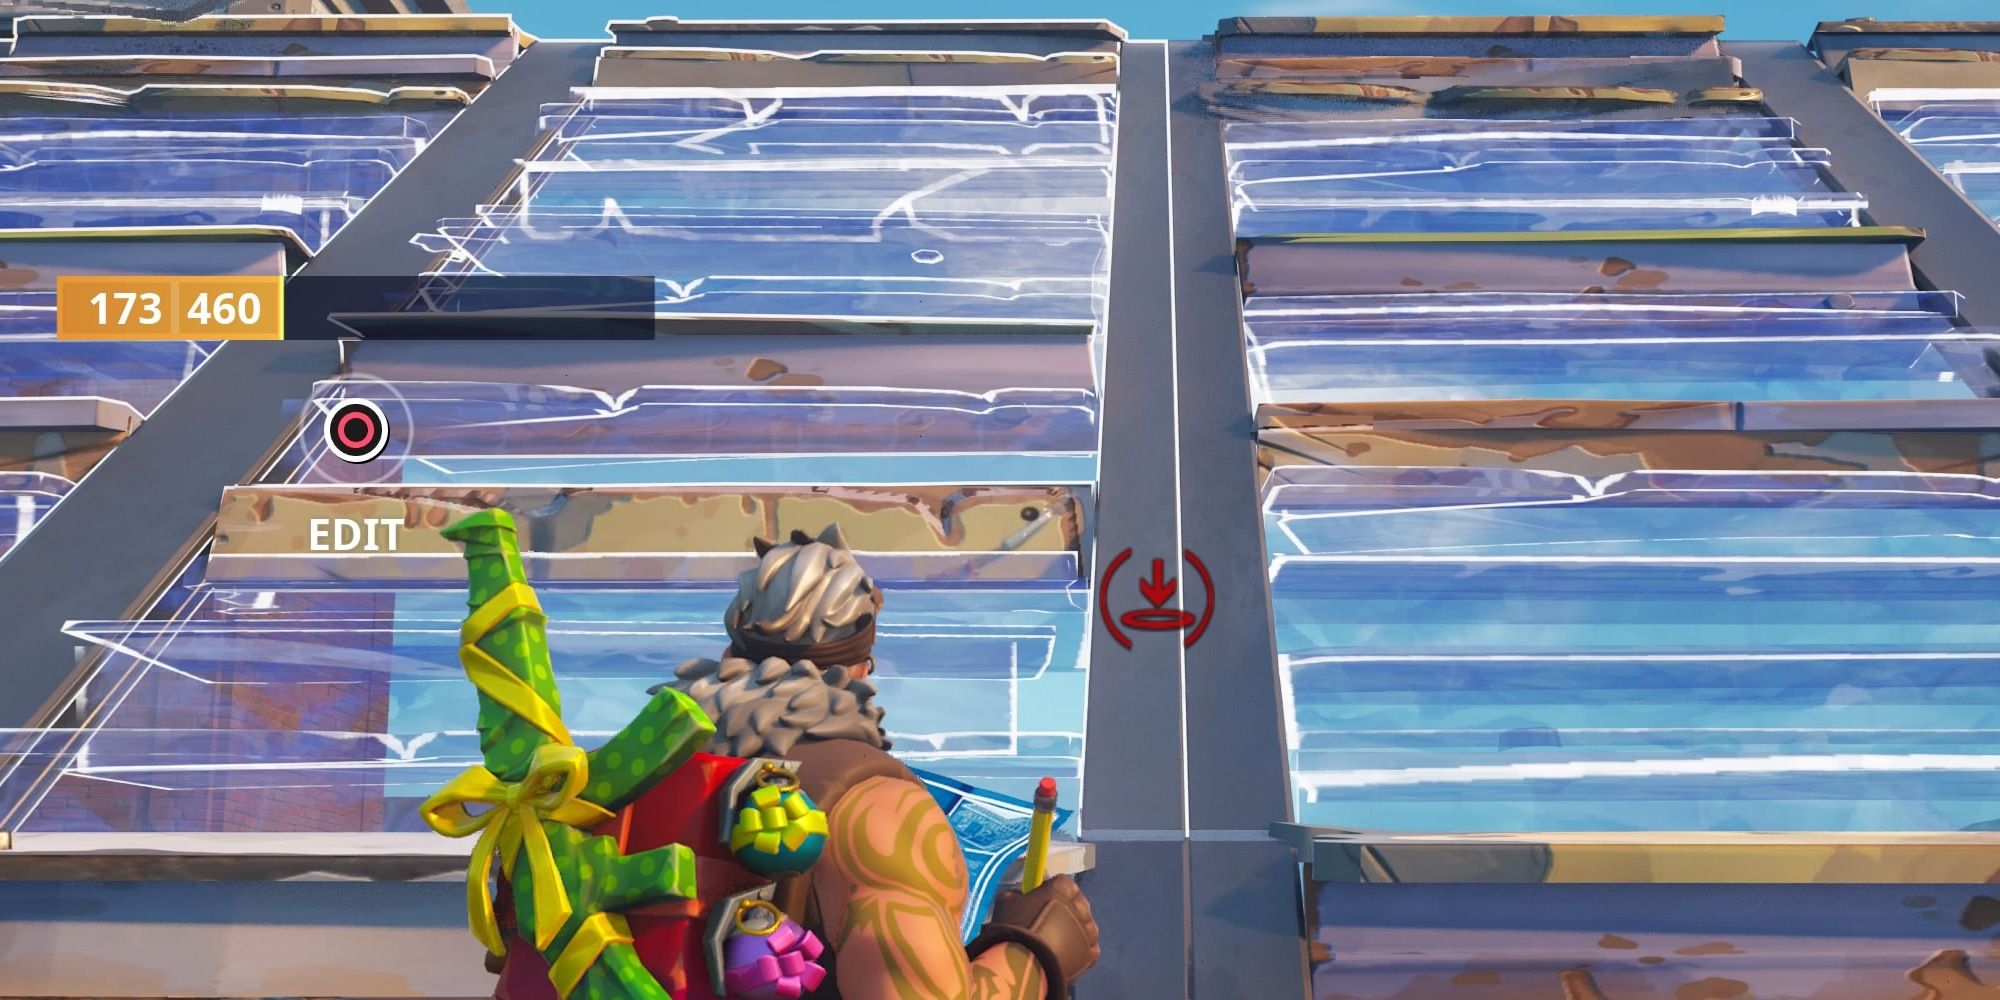 A player builds a metal ramp in OG Fortnite.